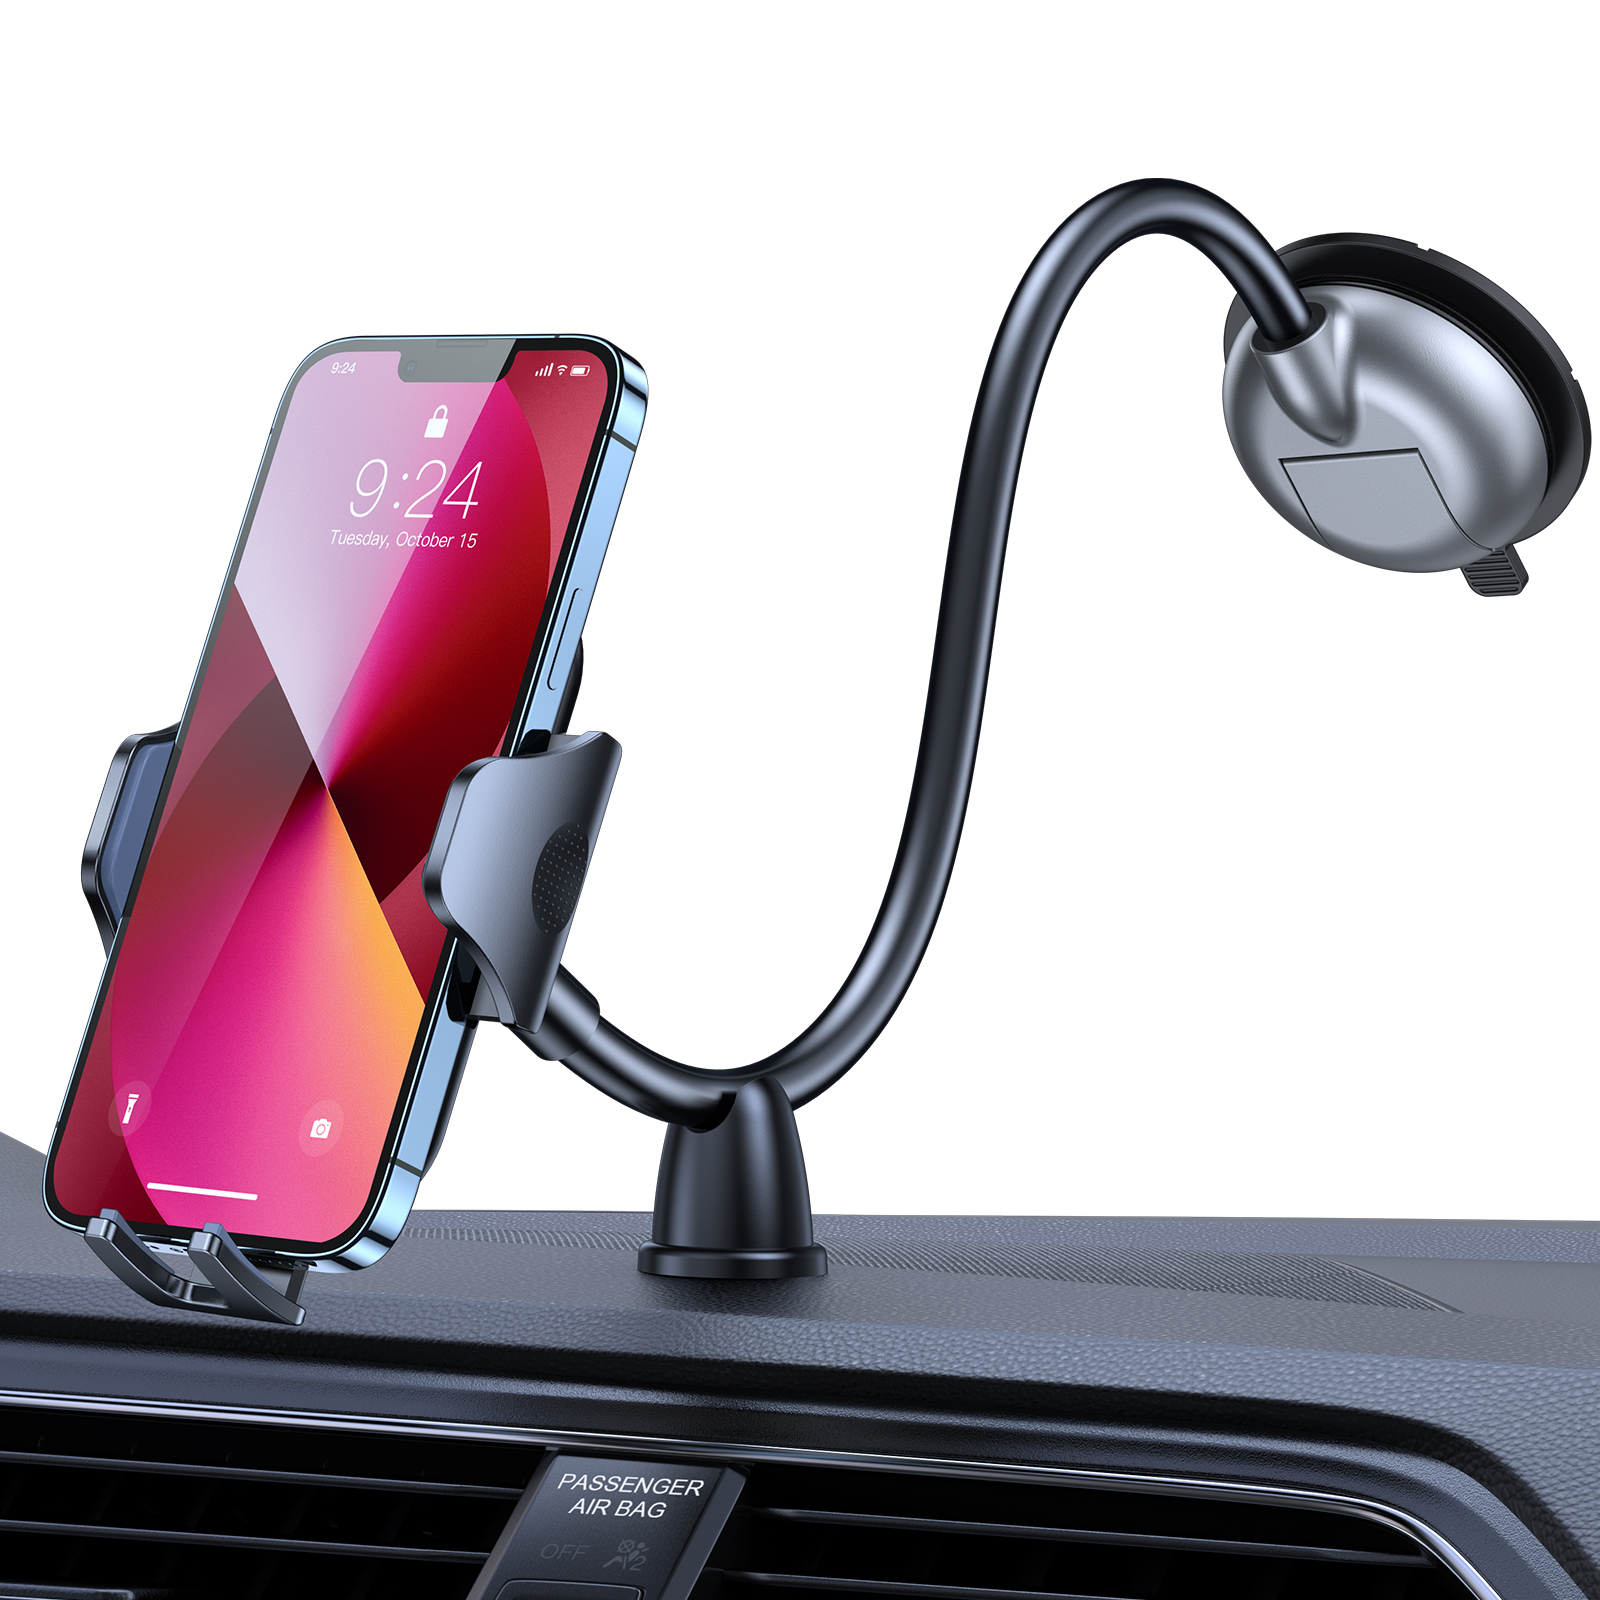 andobil Car Phone Holder [Super Sticky & Holds Phone Securely] Long Arm Dashboard Whindshield Universal Phone Holder Car Mount with Anti-Shake Stabilizer Compatible with All 4"-7" Smartphones